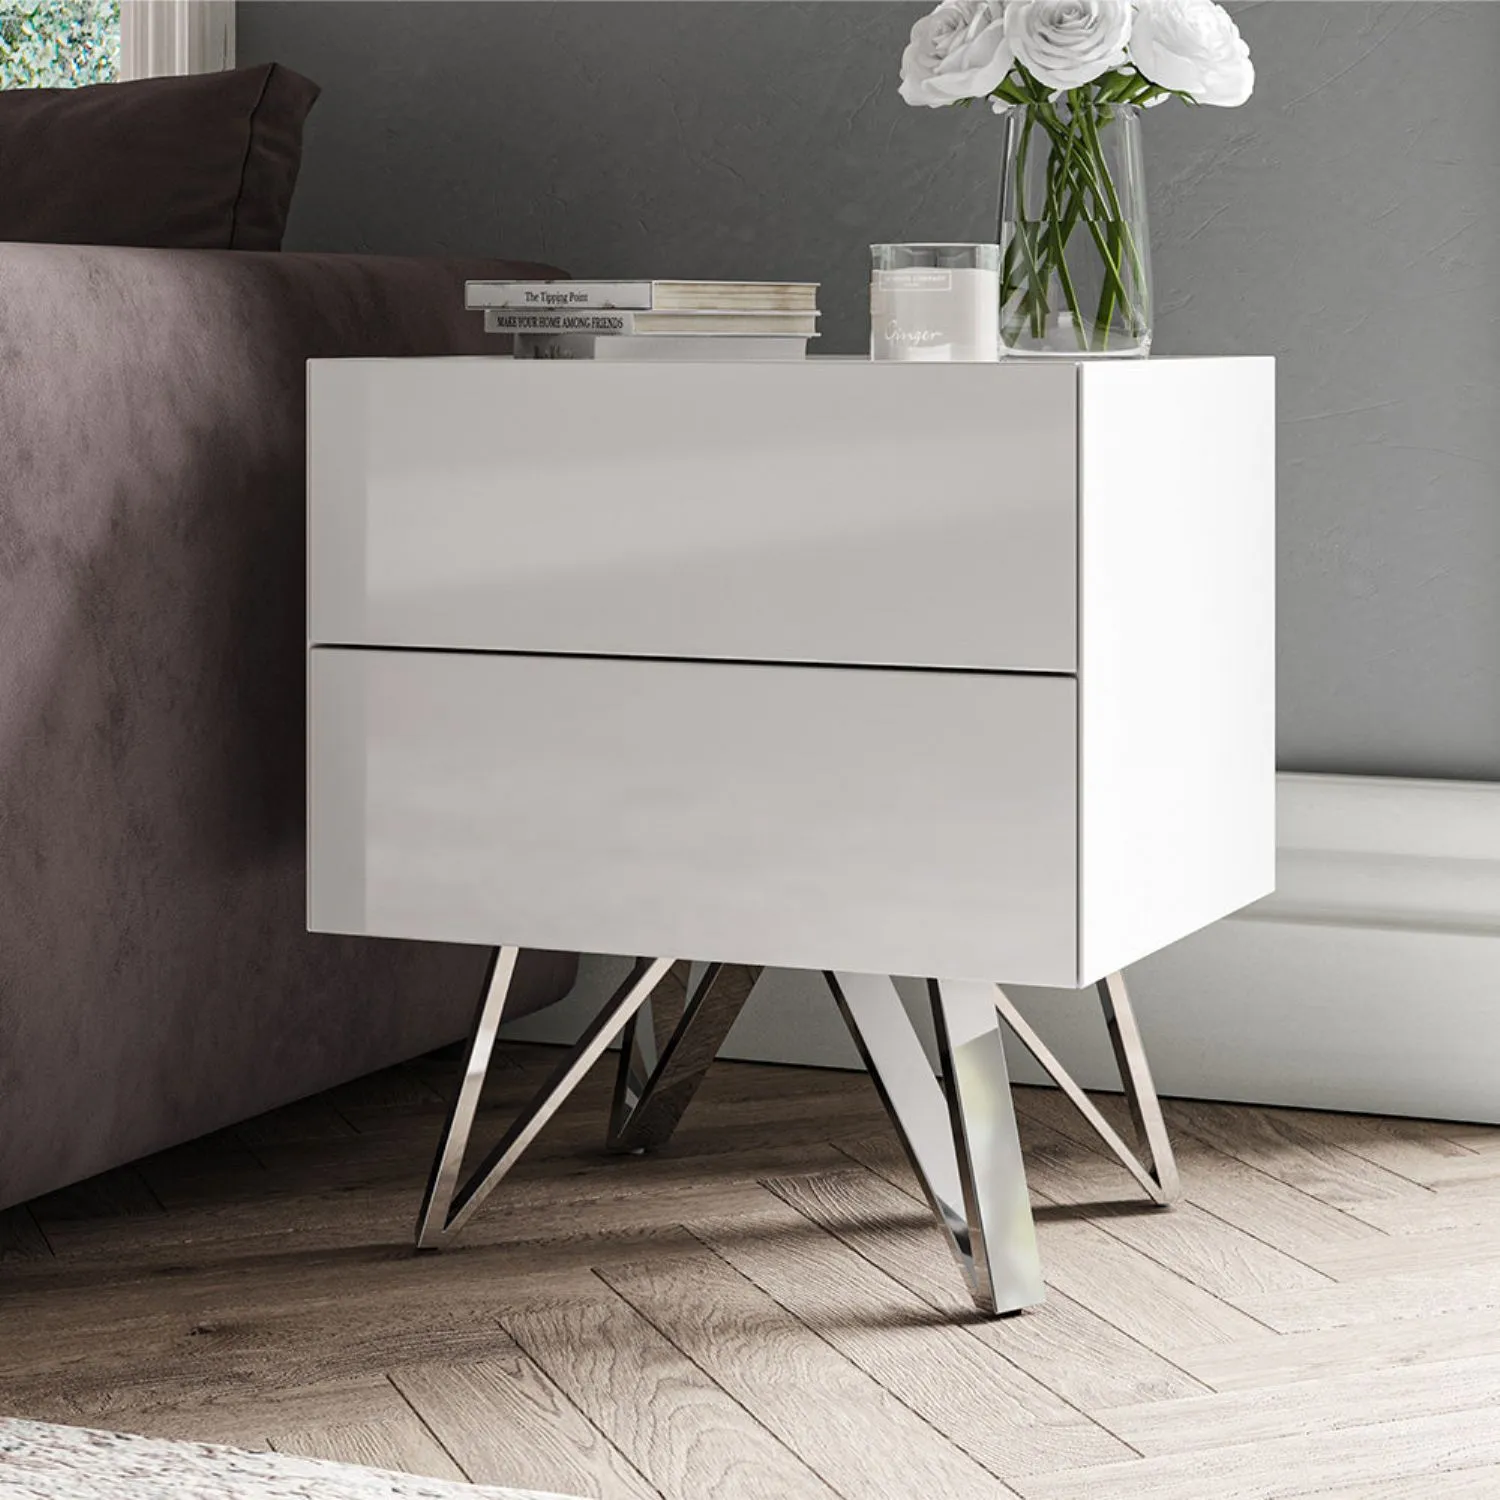 DE Dining White Side Table